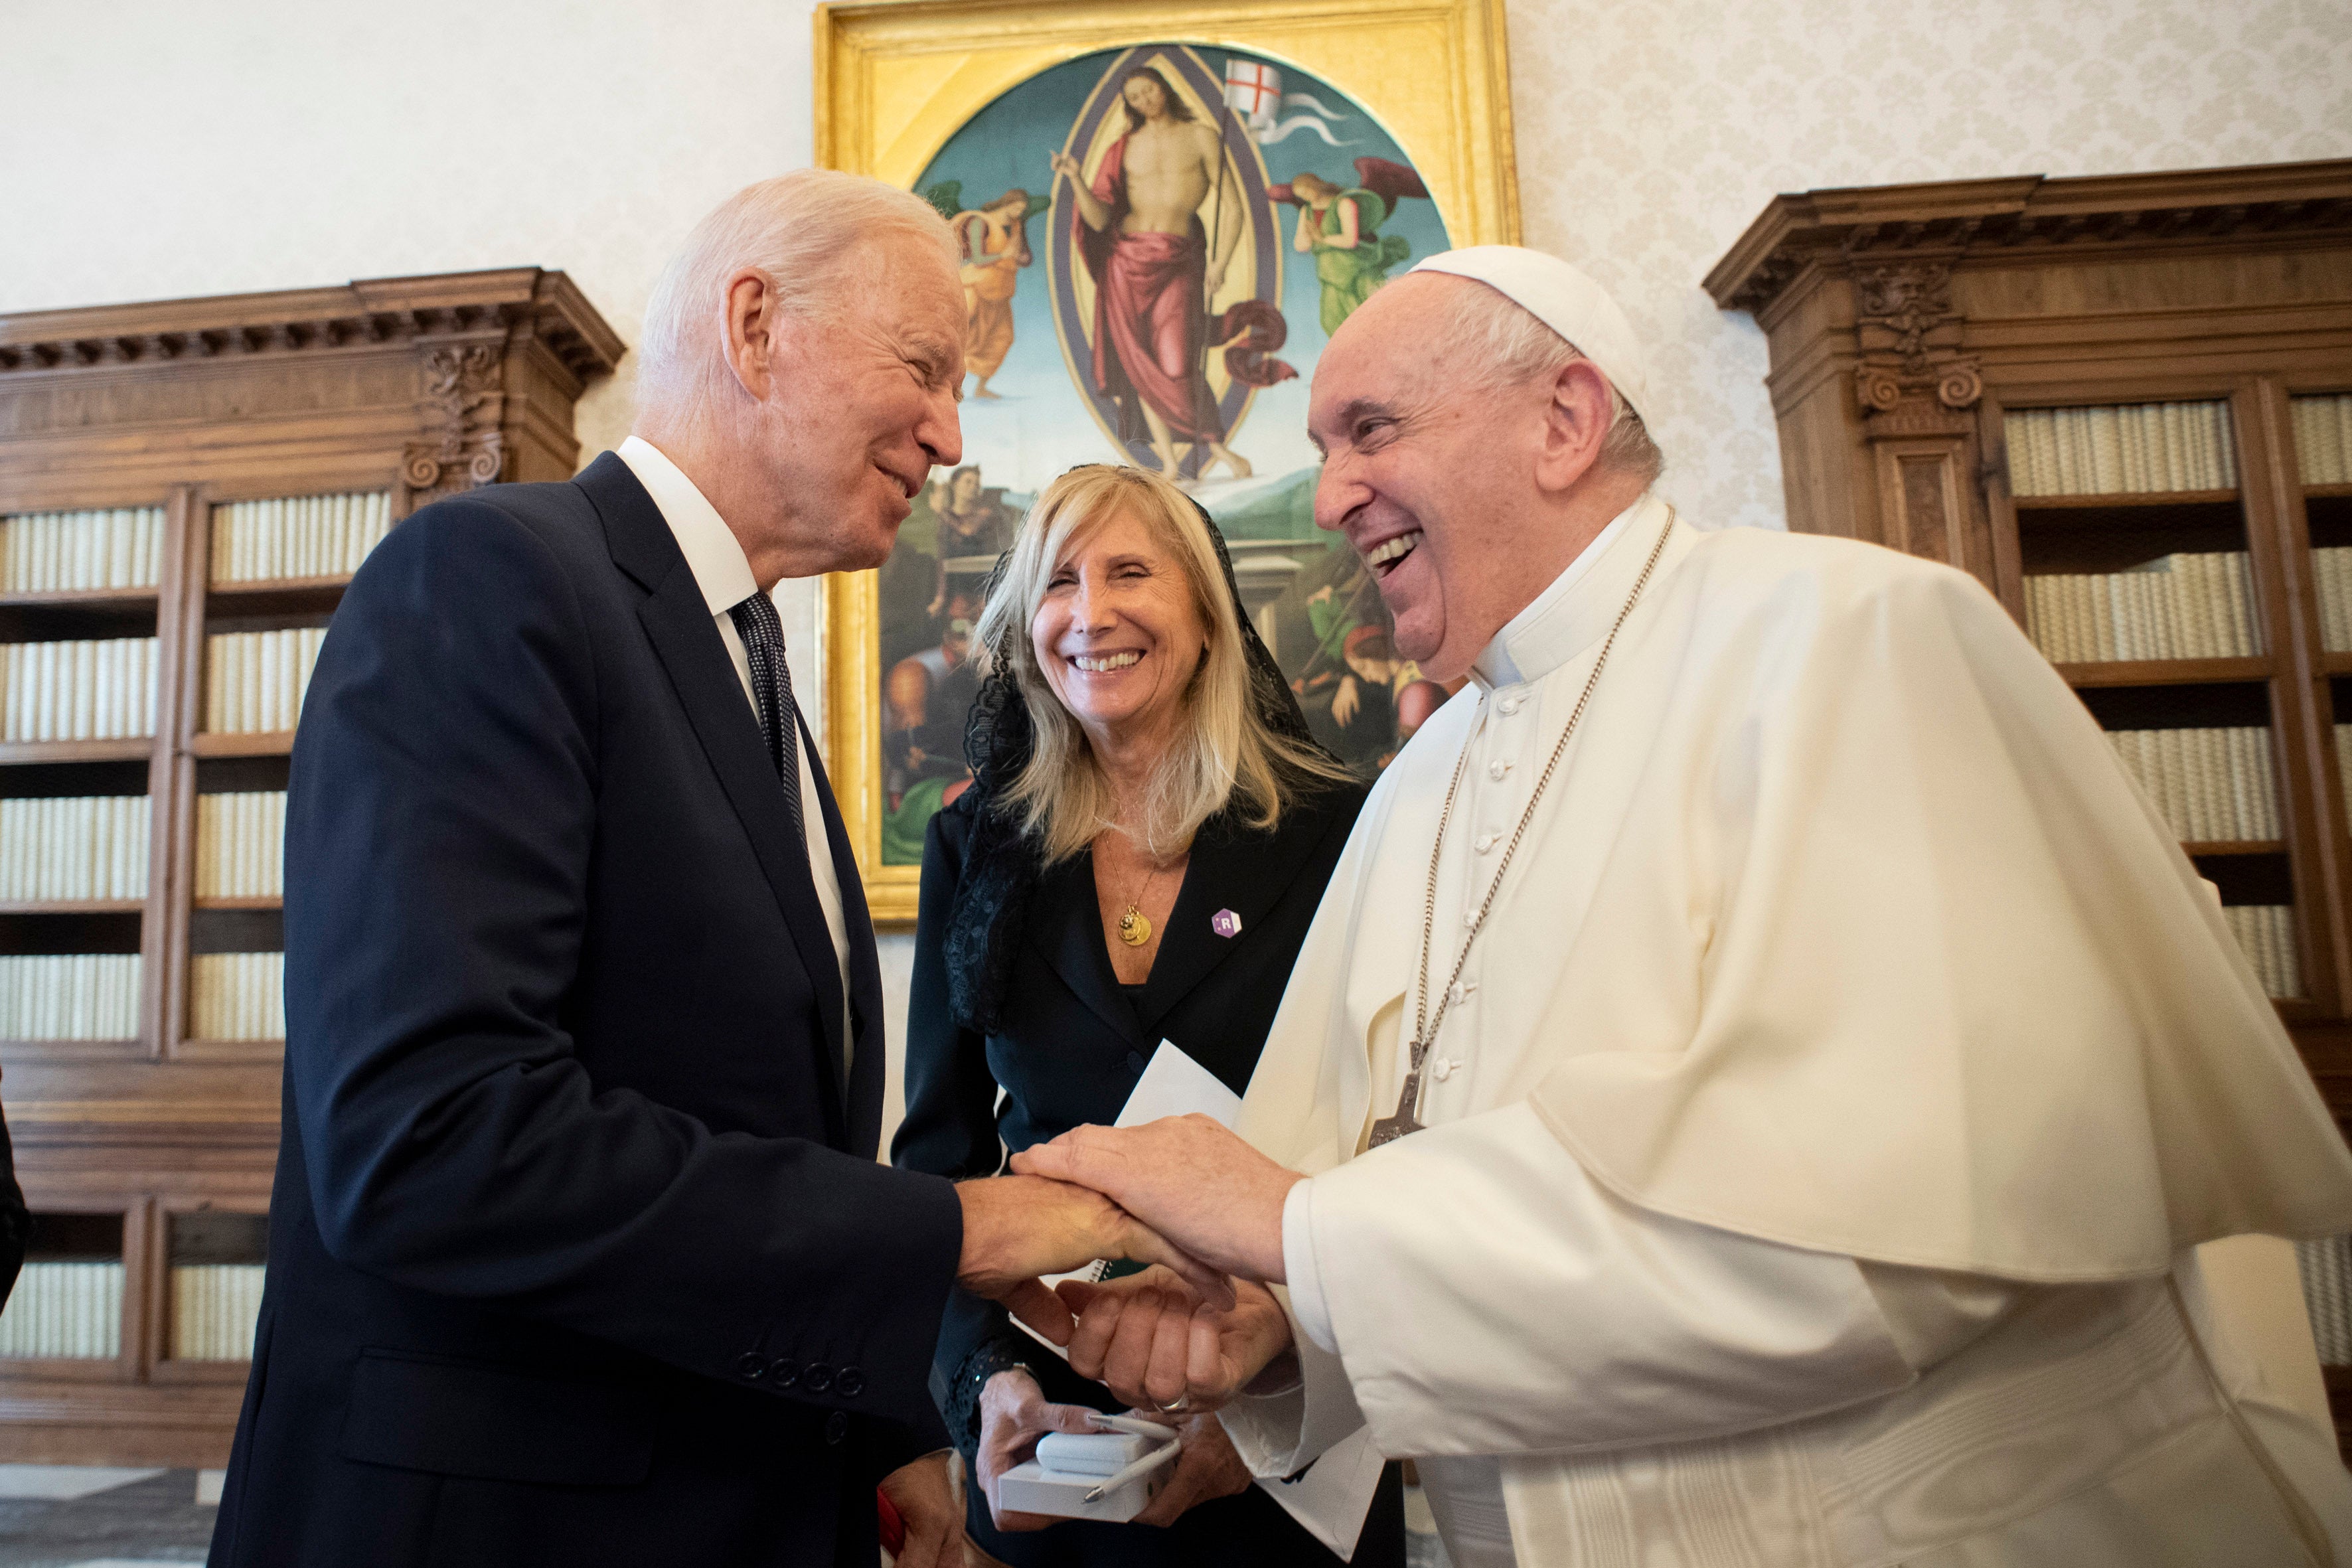 US President Joe Biden, left, shakes hands with Pope Francis as they meet at the Vatican, Friday, Oct. 29, 2021.